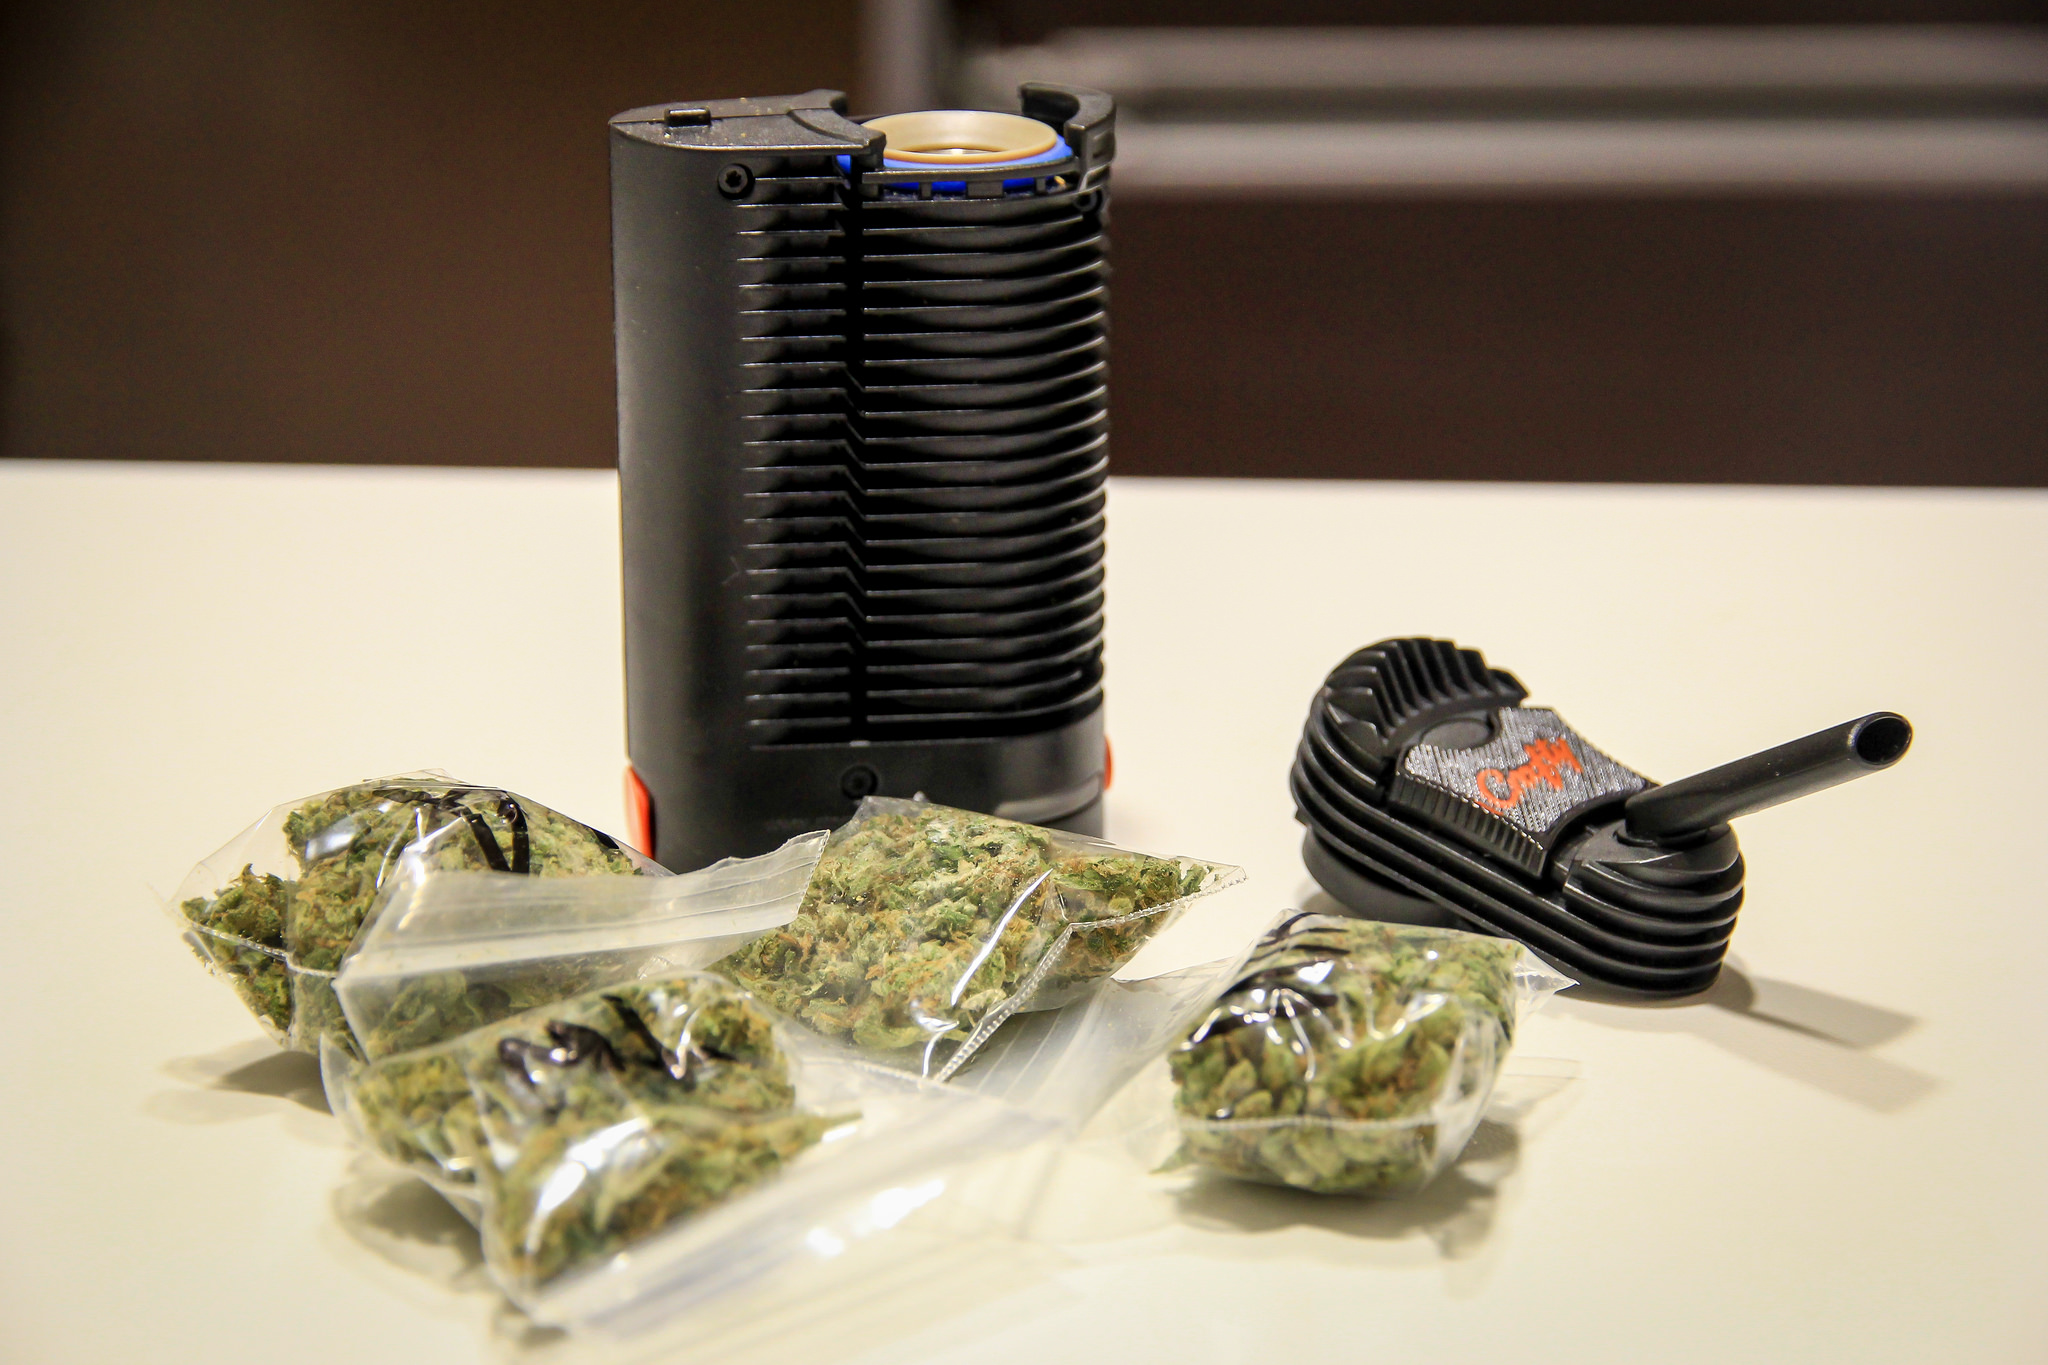 Crafty Portable Vaporizer with Dry Herbs